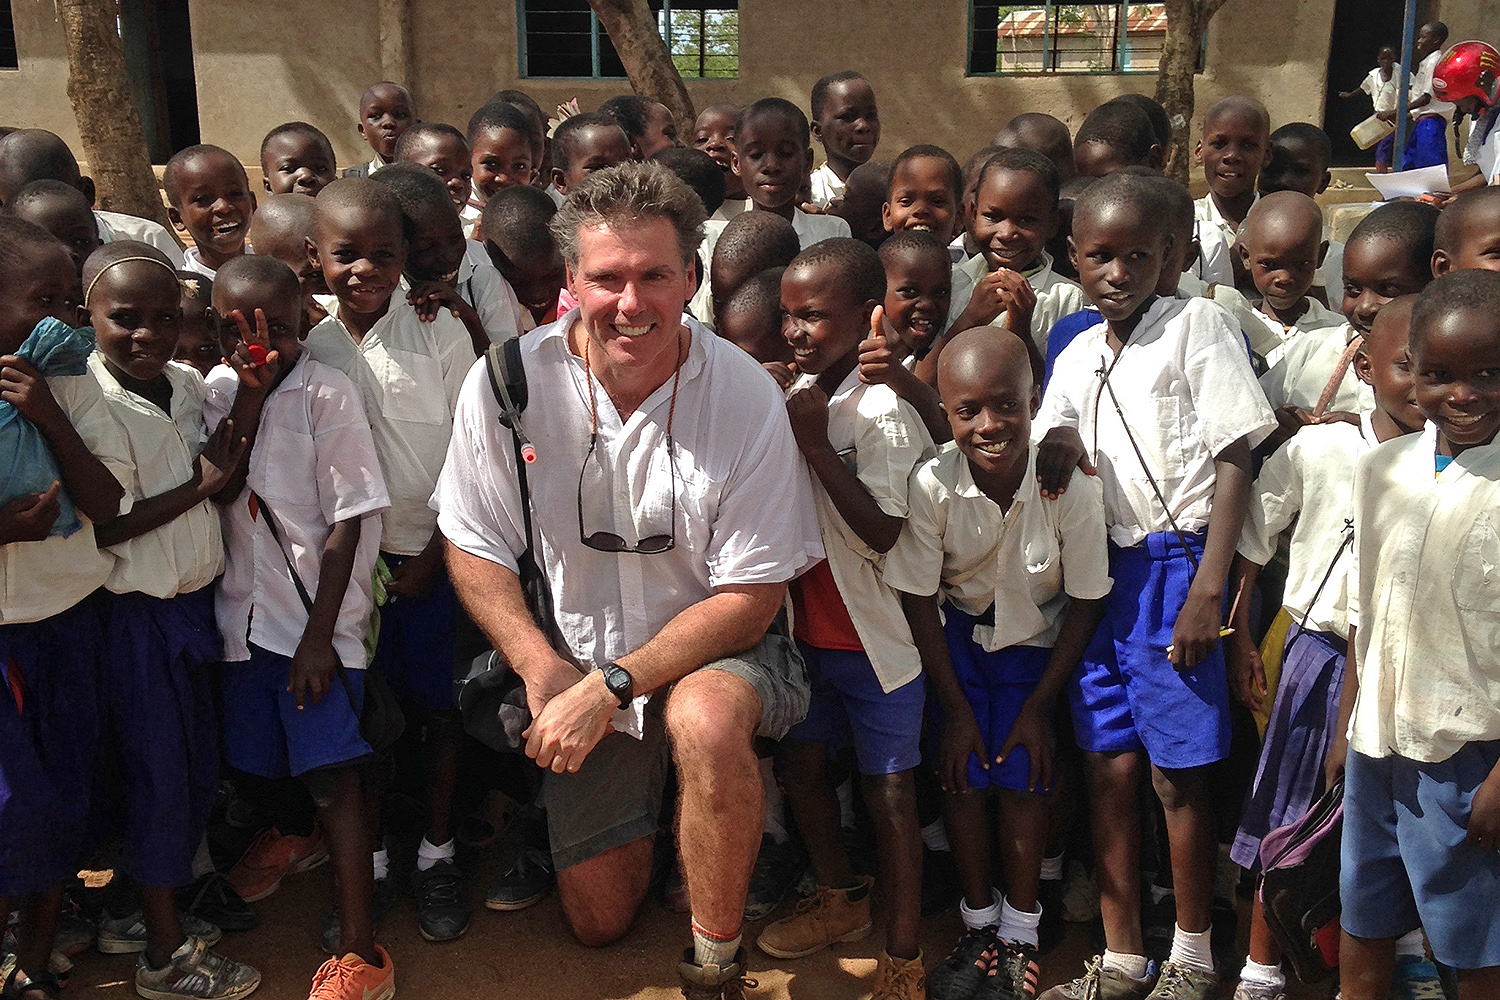 Visiting Max Perel-Slater ’11 in Tanzania, Prof. McAlear joined members of the Maji Safi group on an educational trip to a local school. 